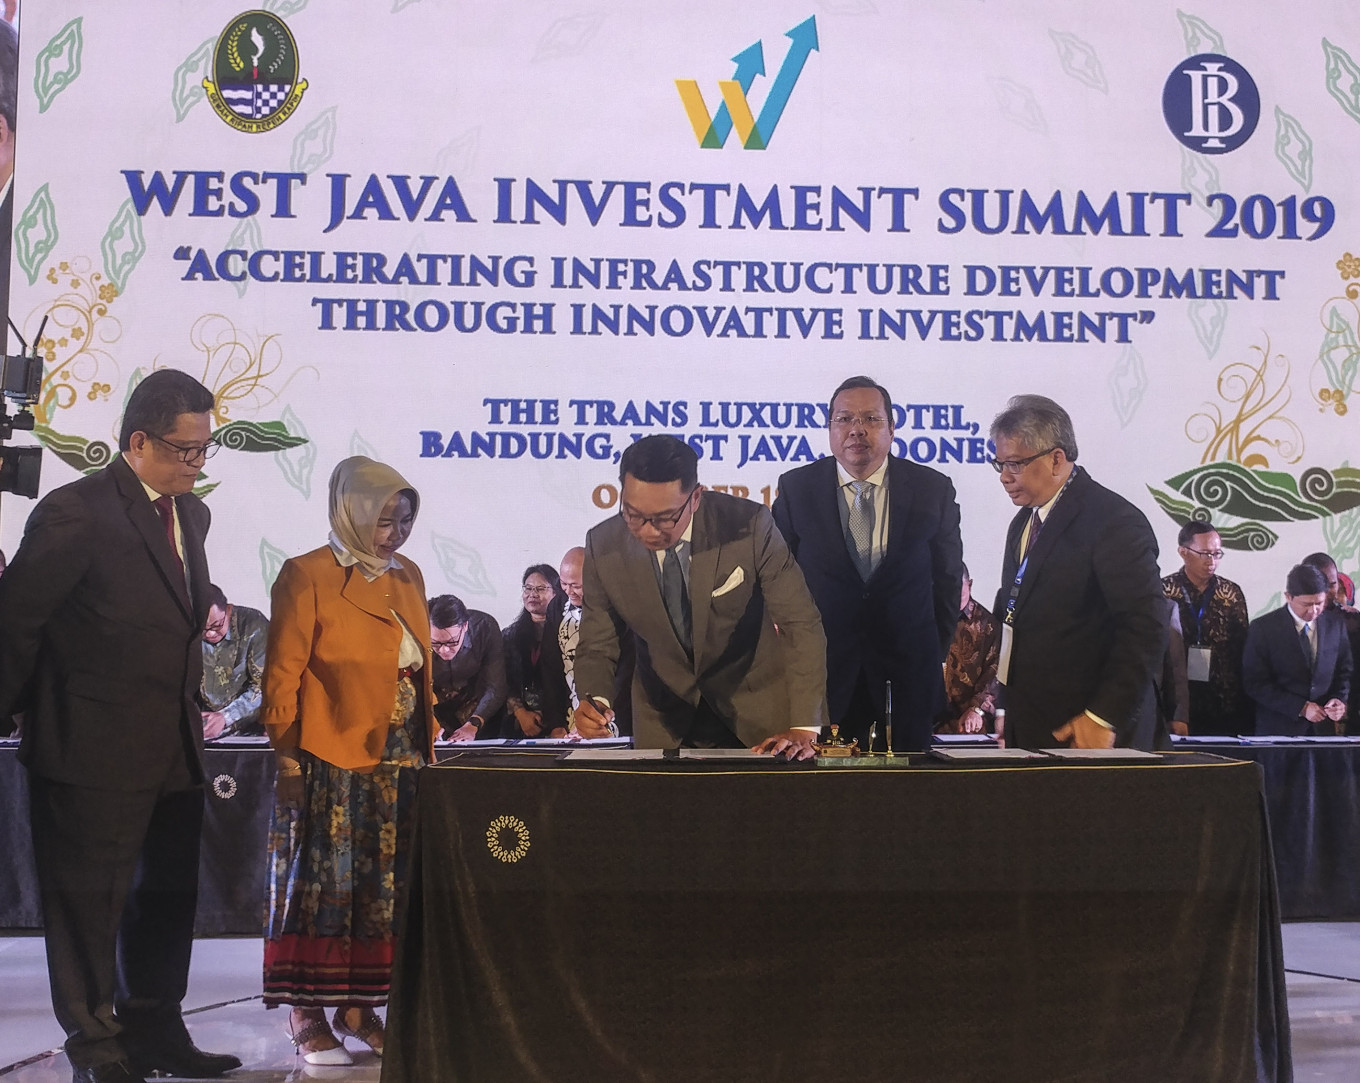 Jokowi’s promising choices for boosting investment